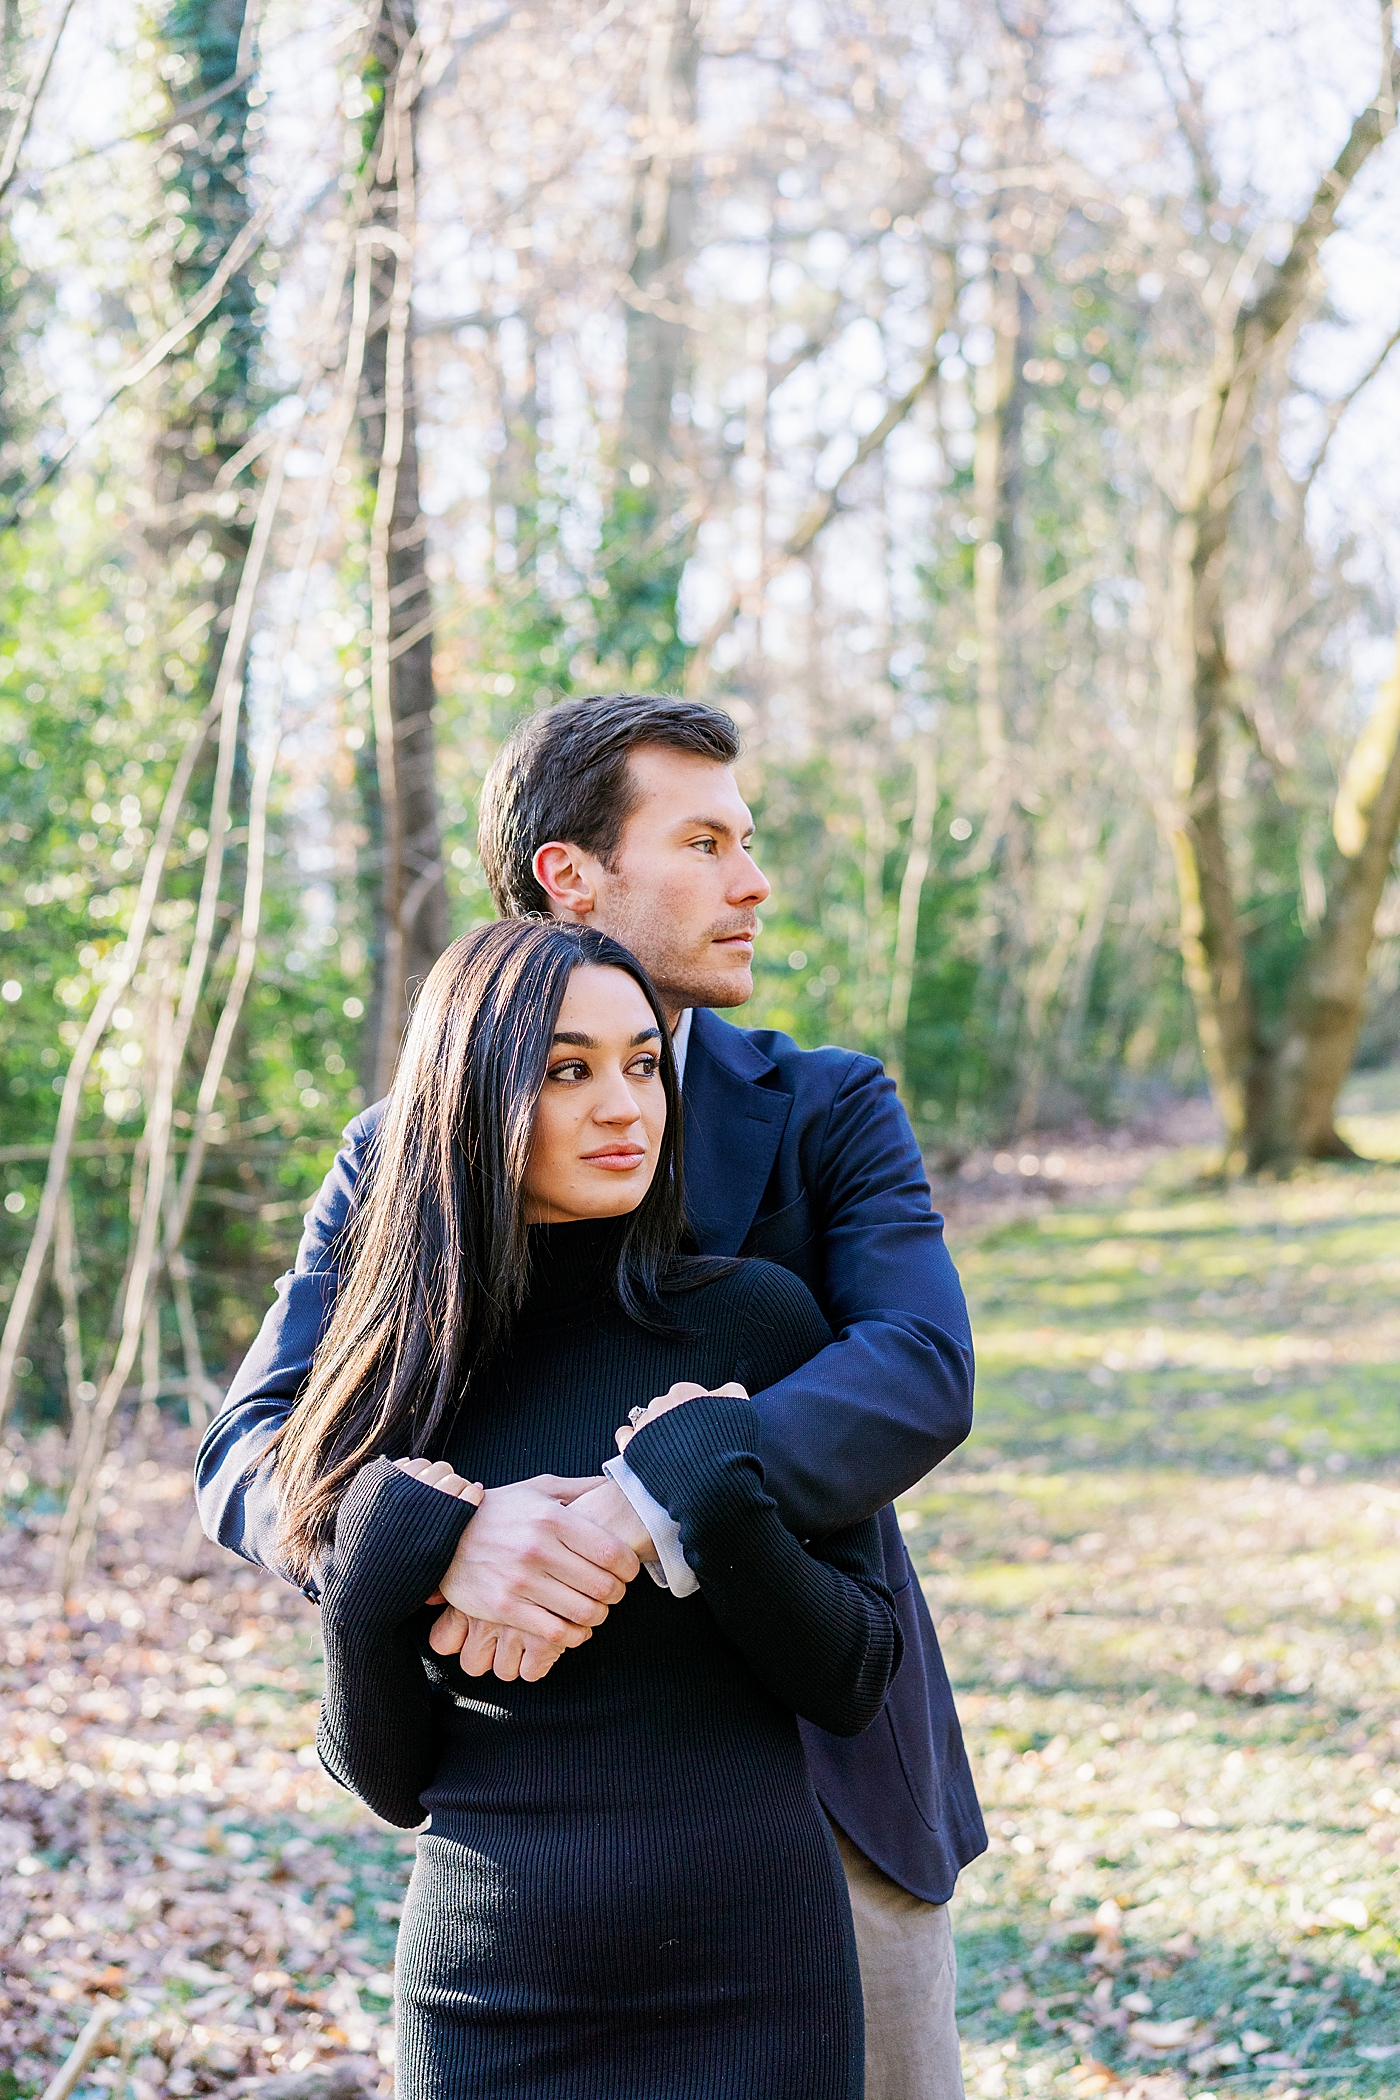 Couple embracing during their engagement session | Image by Annie Laura Photo